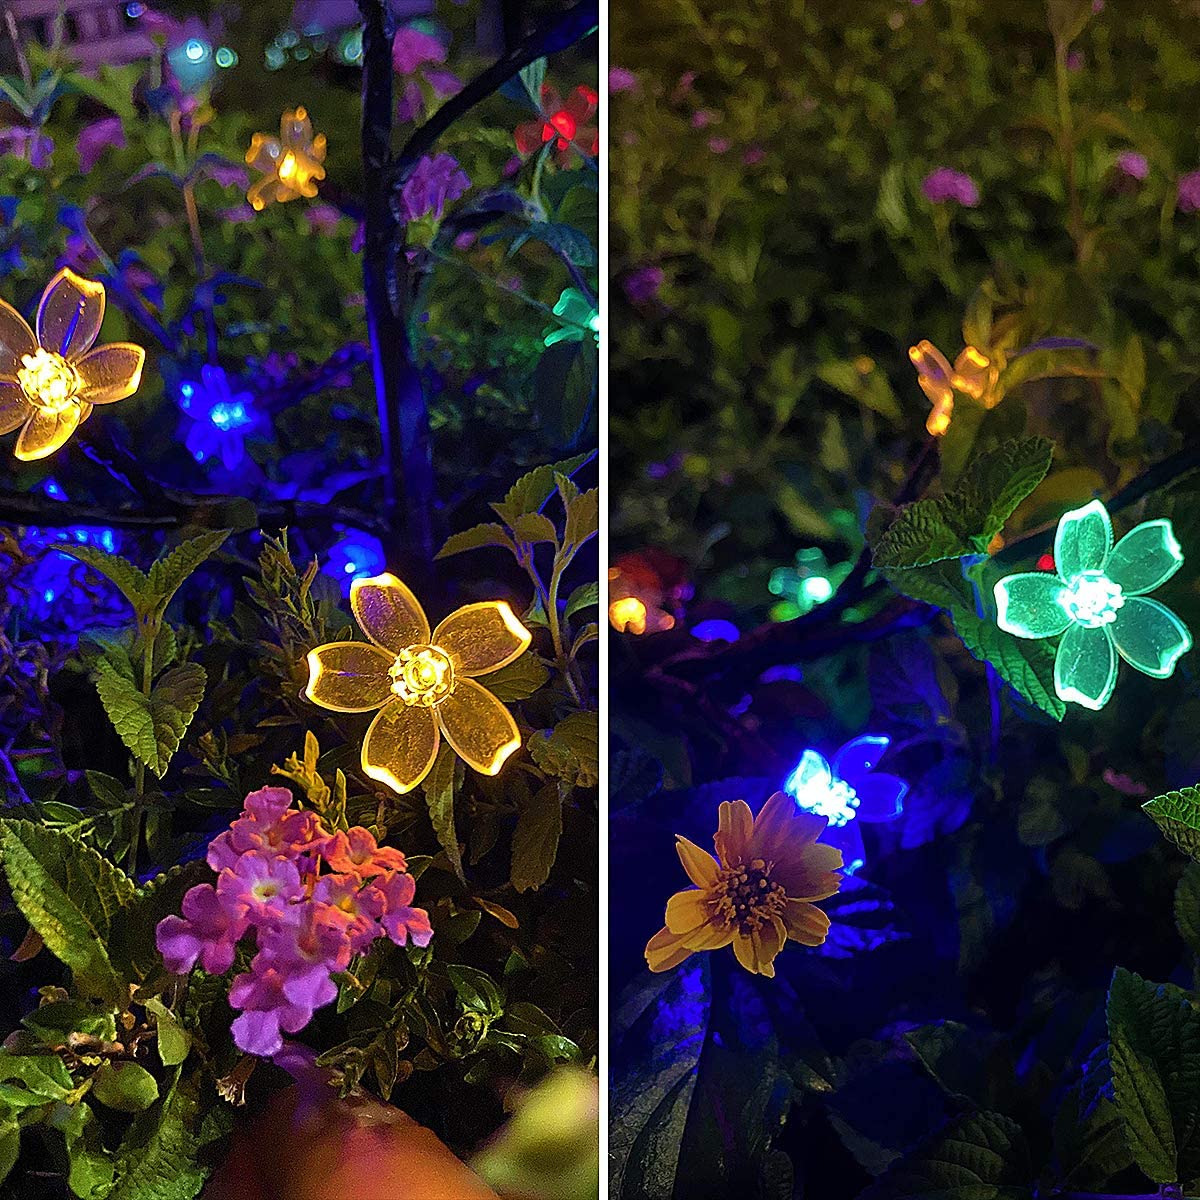 4 Pack Solar Fairy Lights Waterproof Multi-Color Solar Powered Garden Lights, Outdoor Solar Lights, Solar Flower Lights with 20 Cherry Blossom, Bigger Solar Panel for Pathway Patio Yard Christmas Décor - image 5 of 8